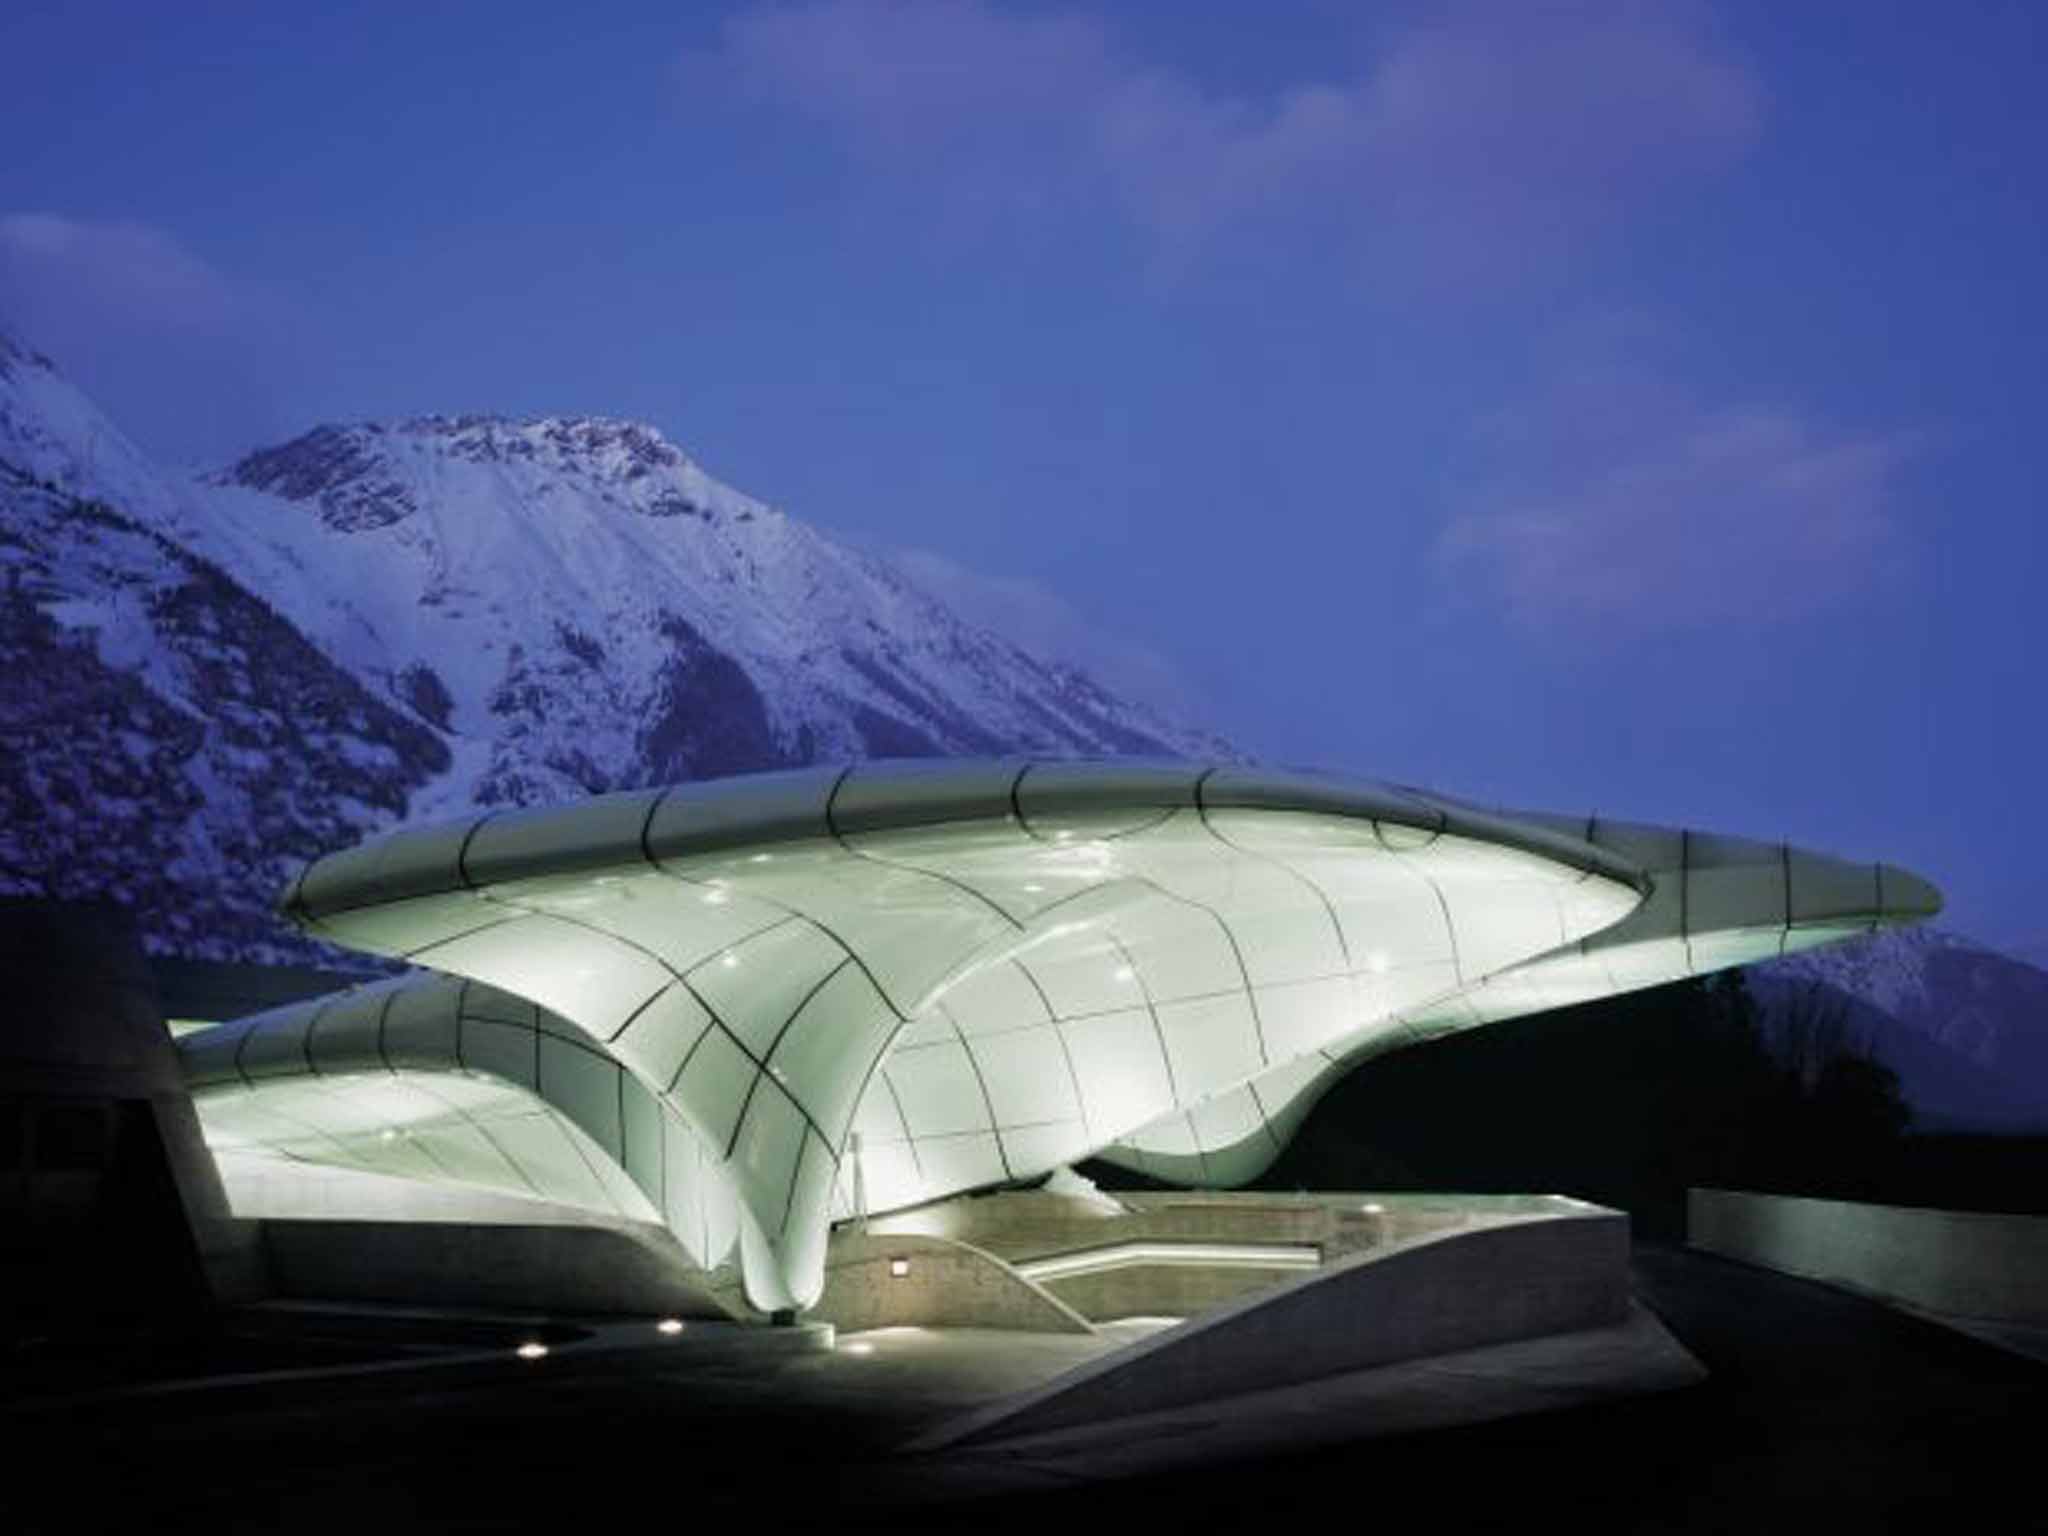 As bold as ice: the Zaha Hadid designed Nordpark Cable Railway